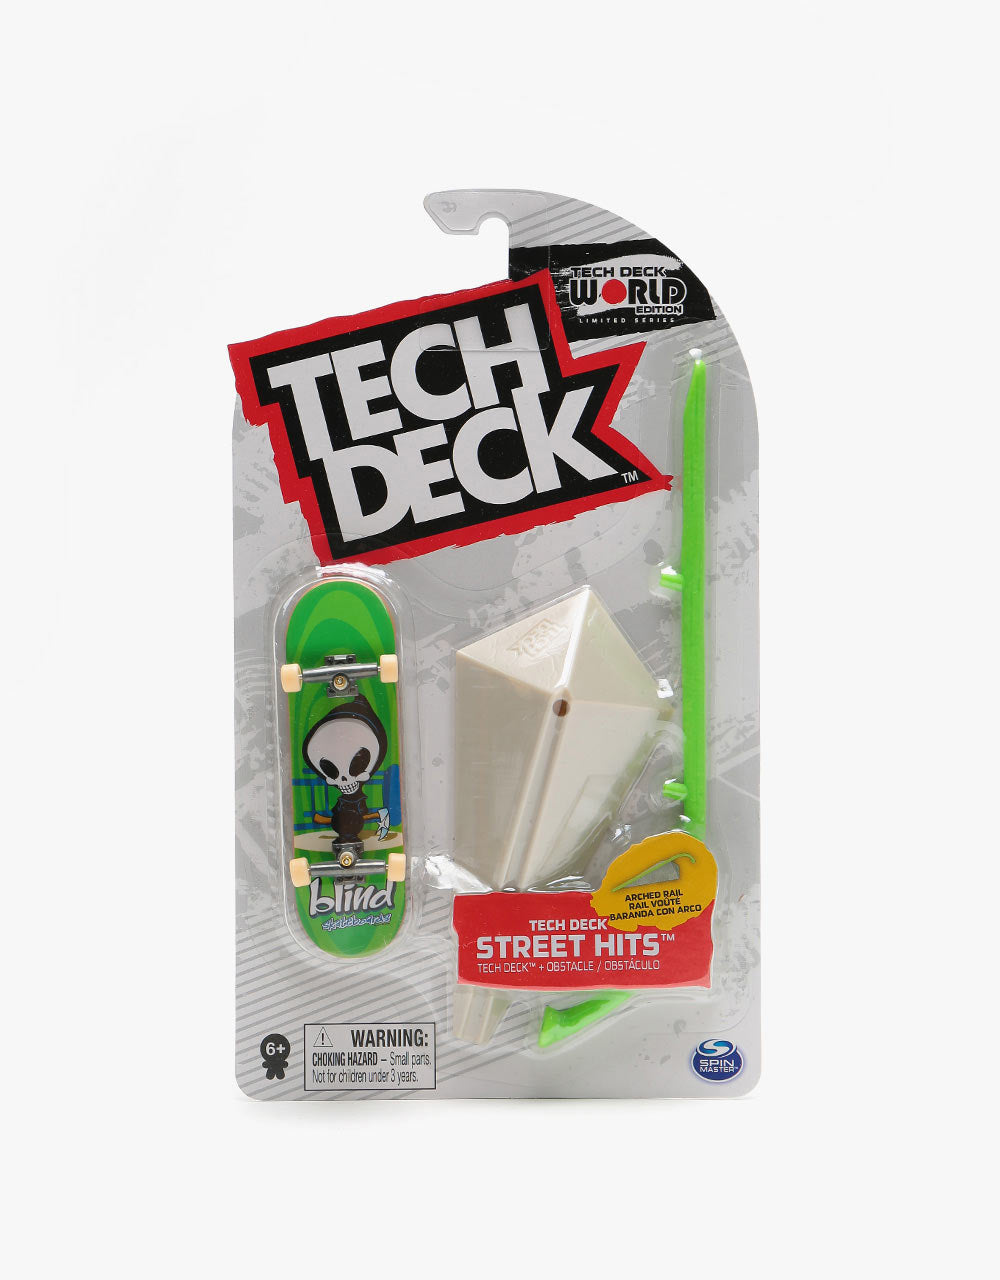 Tech Deck Fingerboard Street Hits - Arched Rail